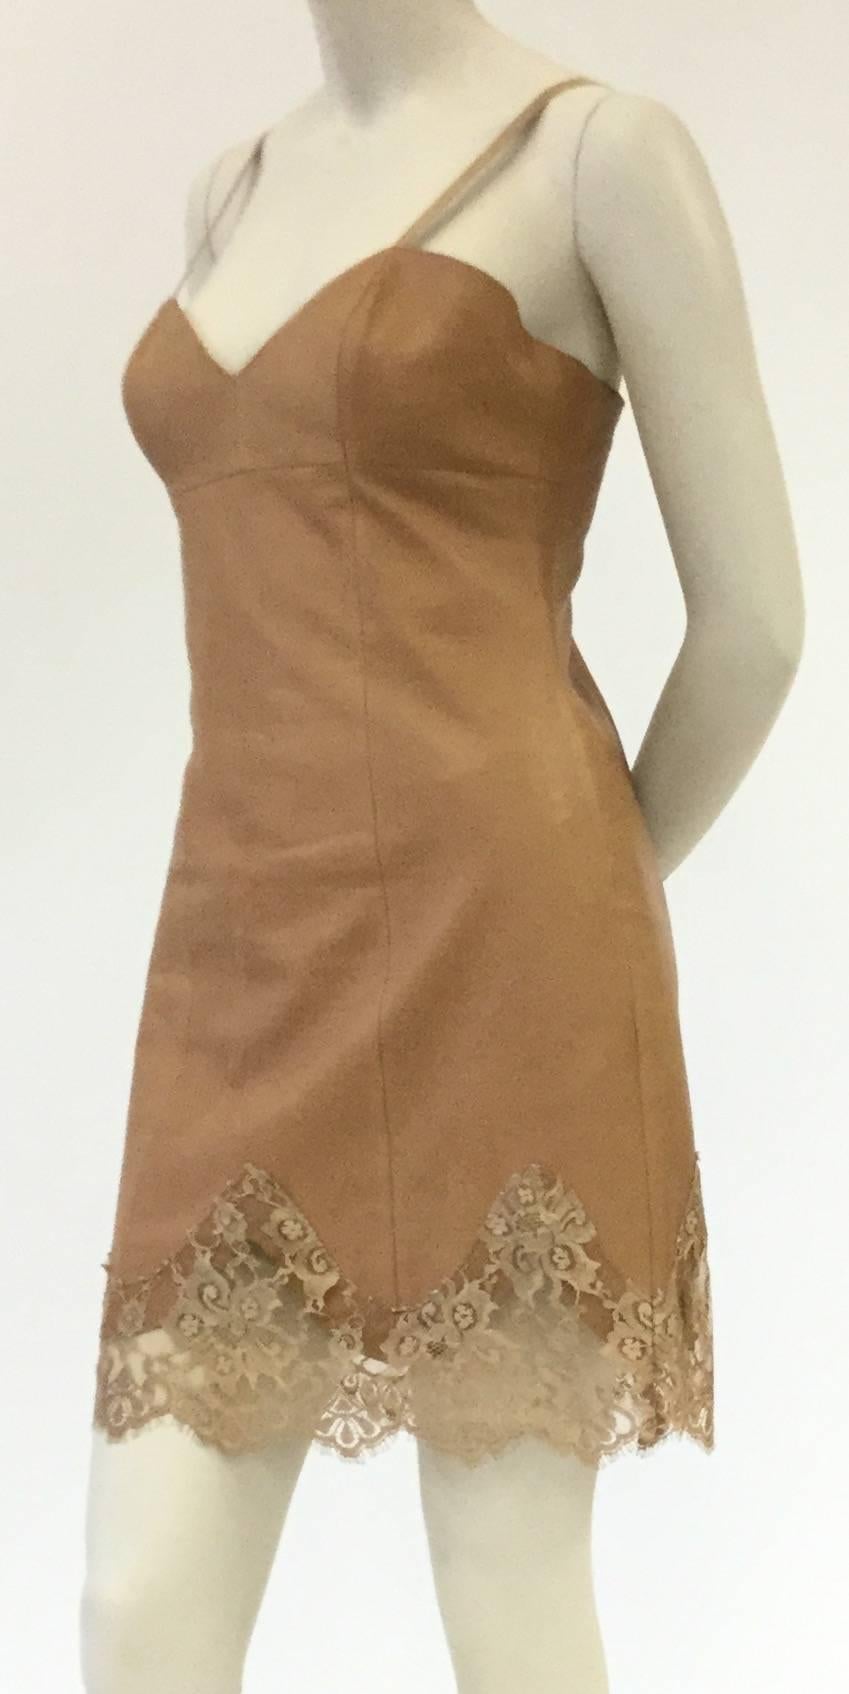 A sweet and edgy slip dress by Michael Hoban North Beach Leather. This minidress features a sweetheart neckline with thin straps, and princess seams that emphasize the wearer's waistline. The dress has a wide scalloped leather hem under a scalloped